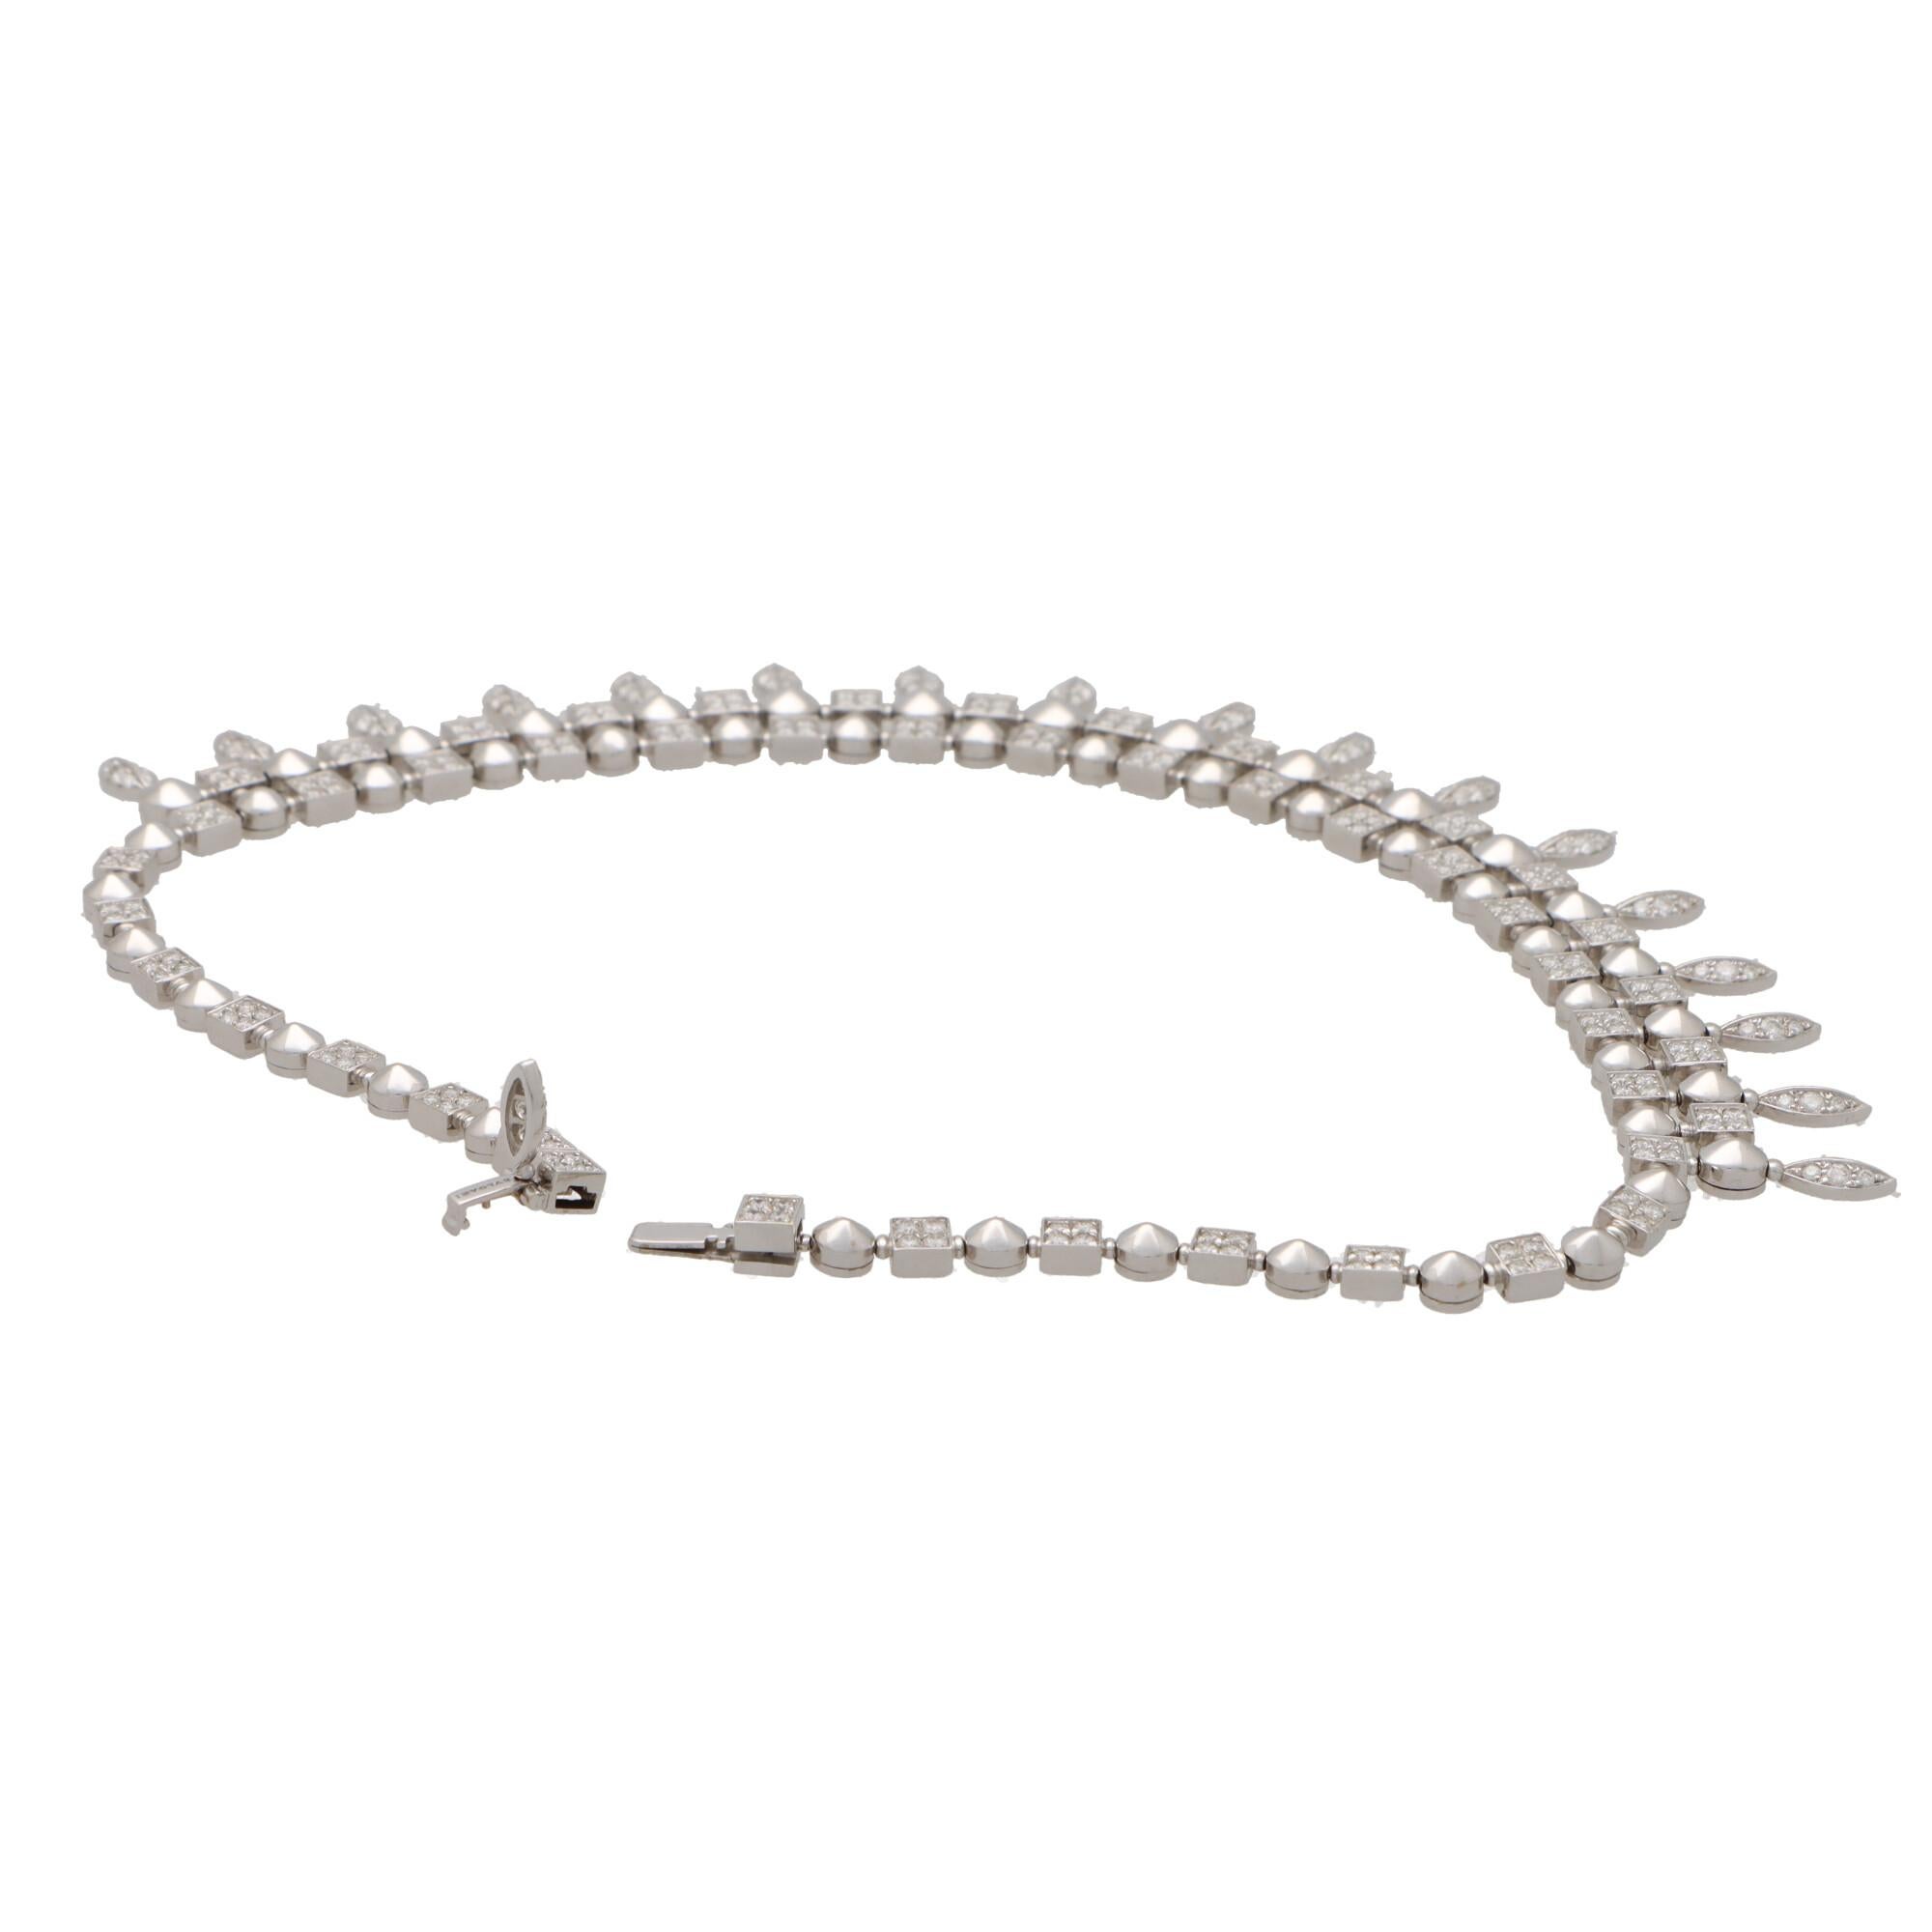 Round Cut Vintage Bvlgari 'Lucea' Diamond Choker Necklace in 18k White Gold For Sale